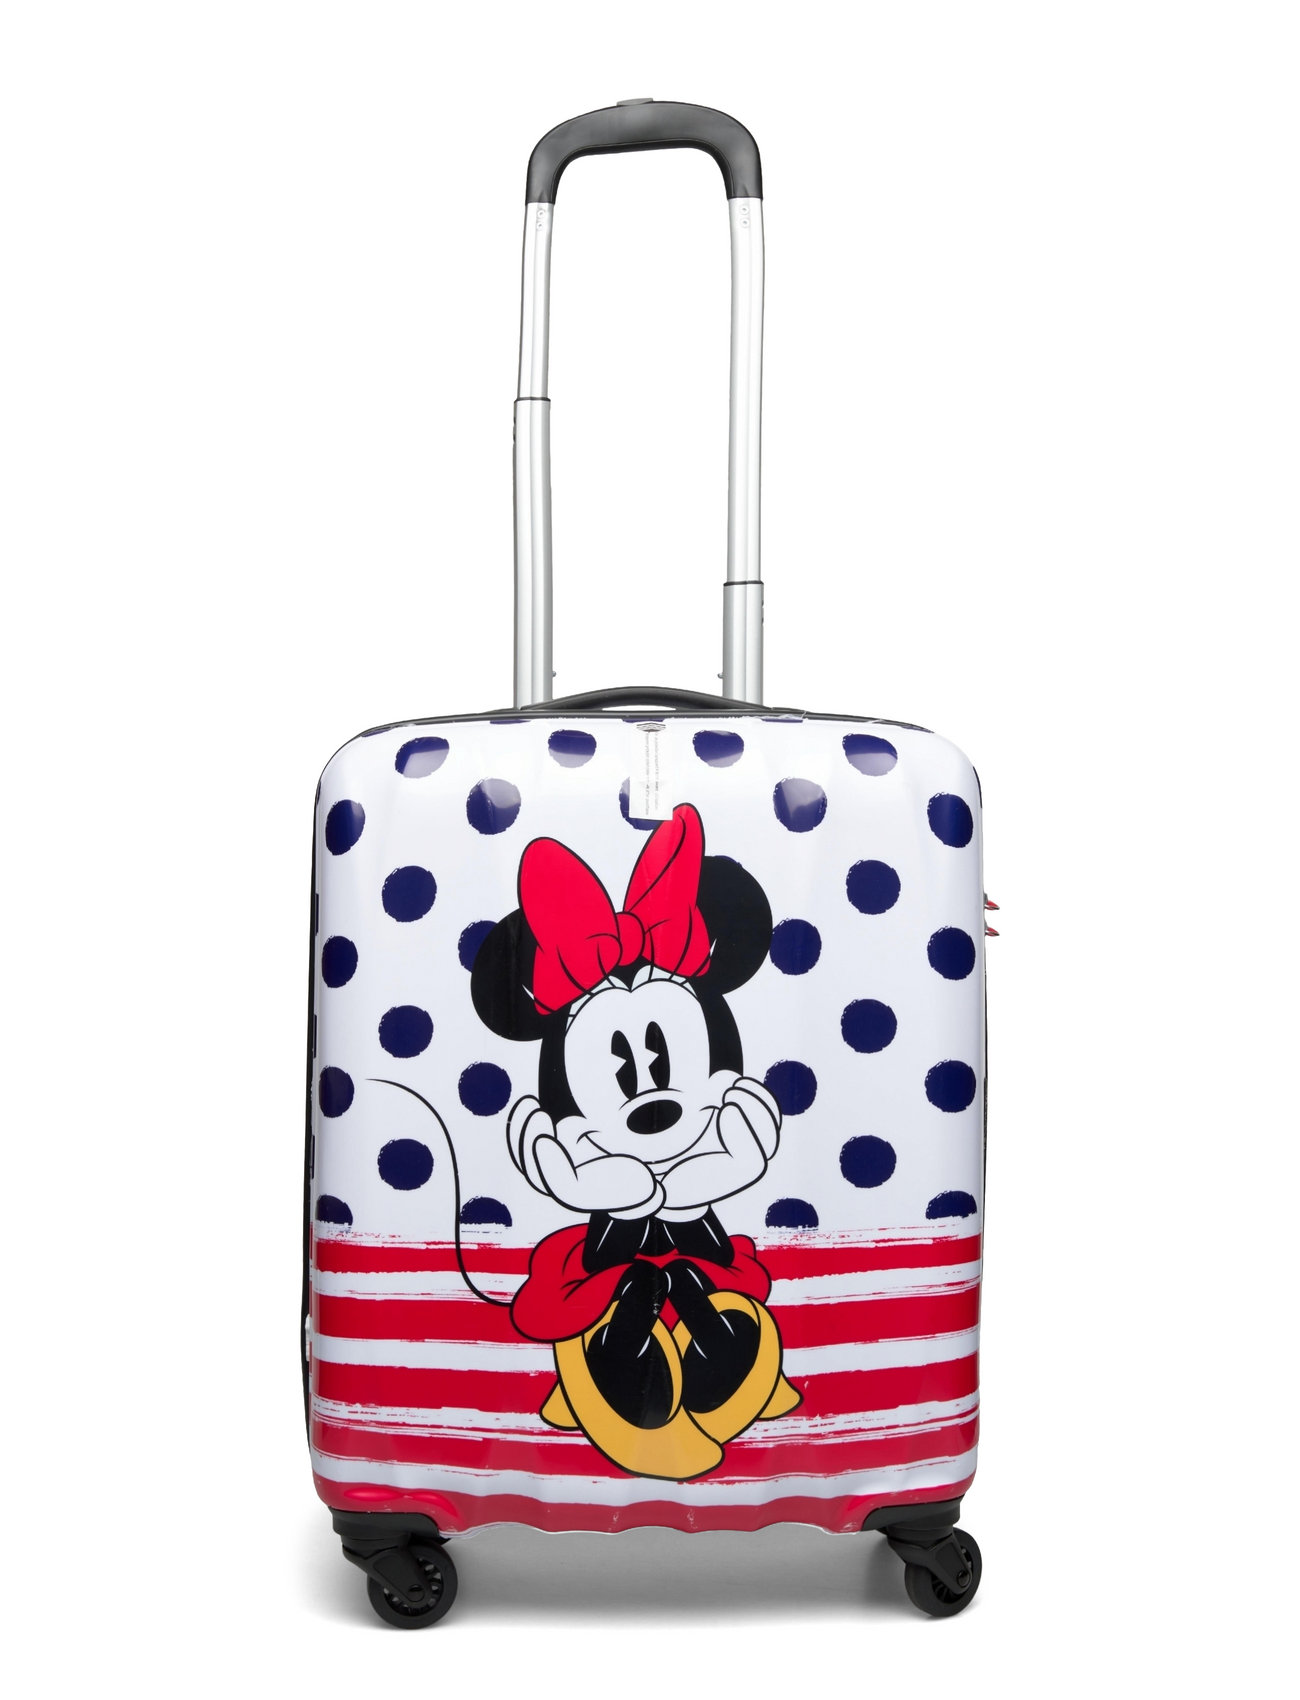 "American Tourister" "Marvel Legend Alfatwist Spinner 55 Mickey Blue Dots Accessories Bags Travel Multi/patterned American